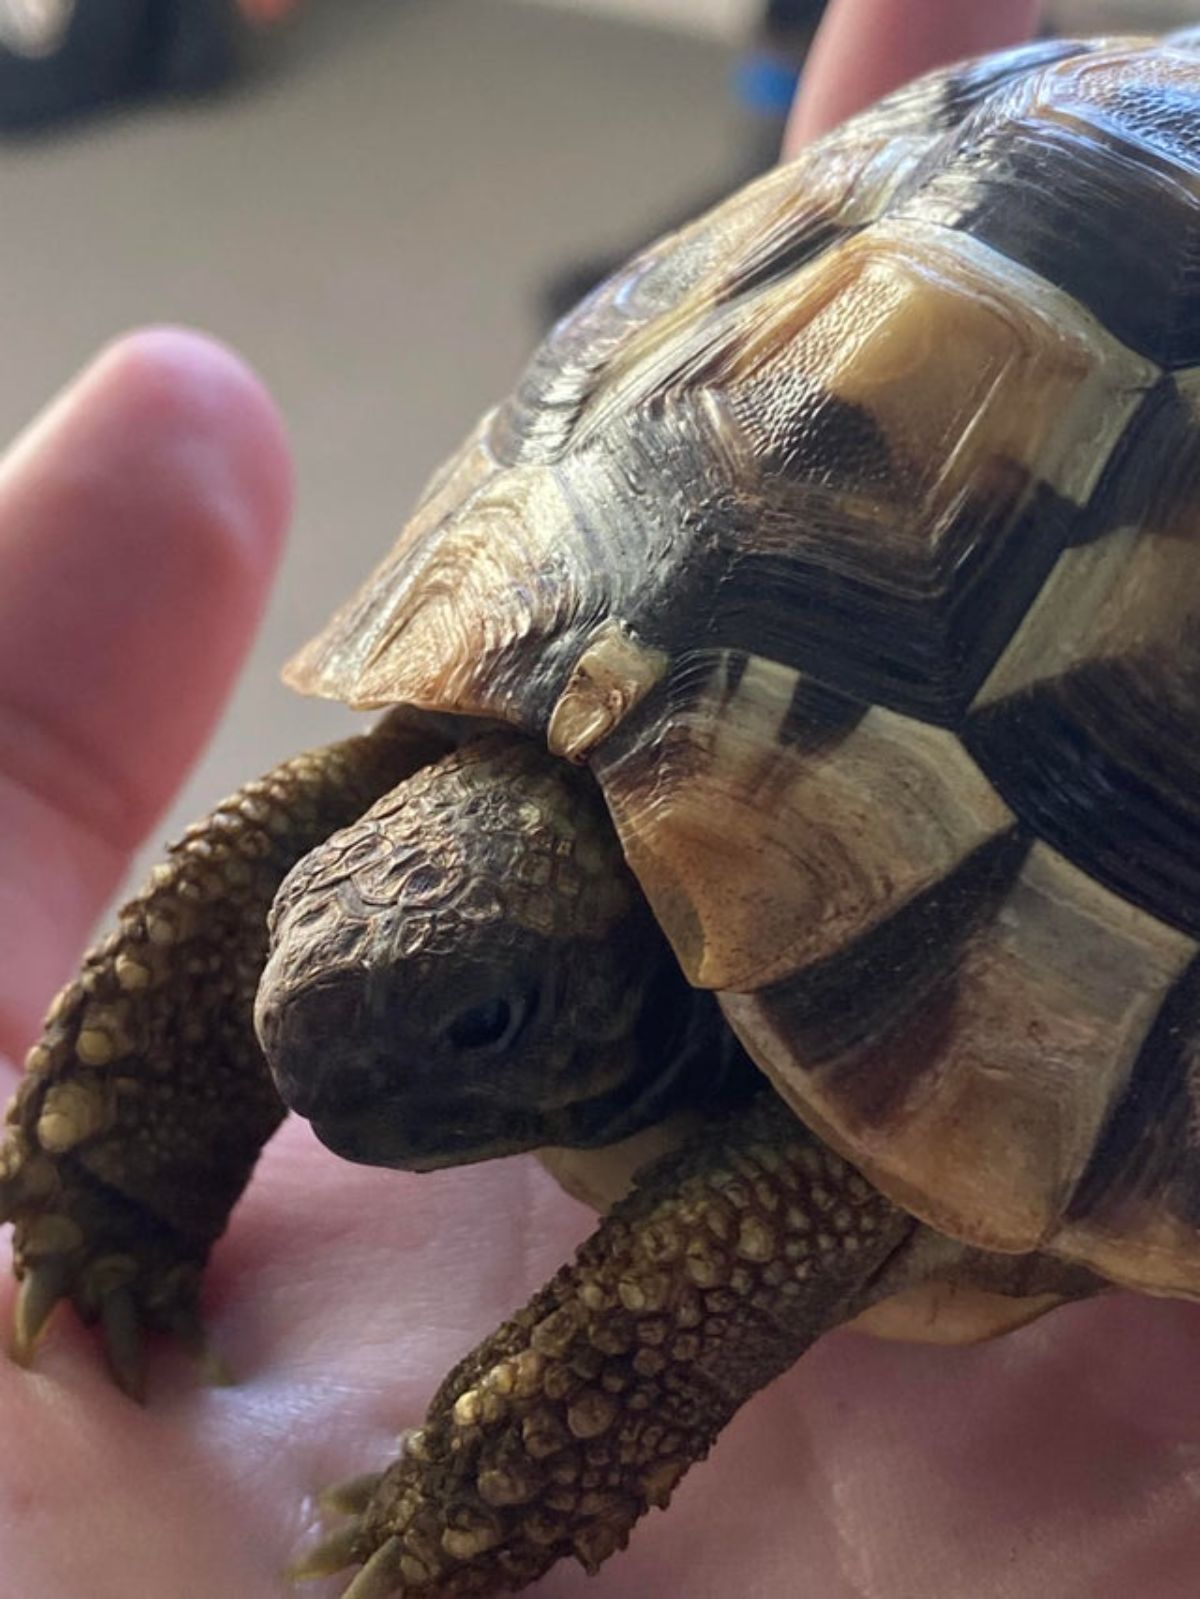 a tortoise being held in someone's hand